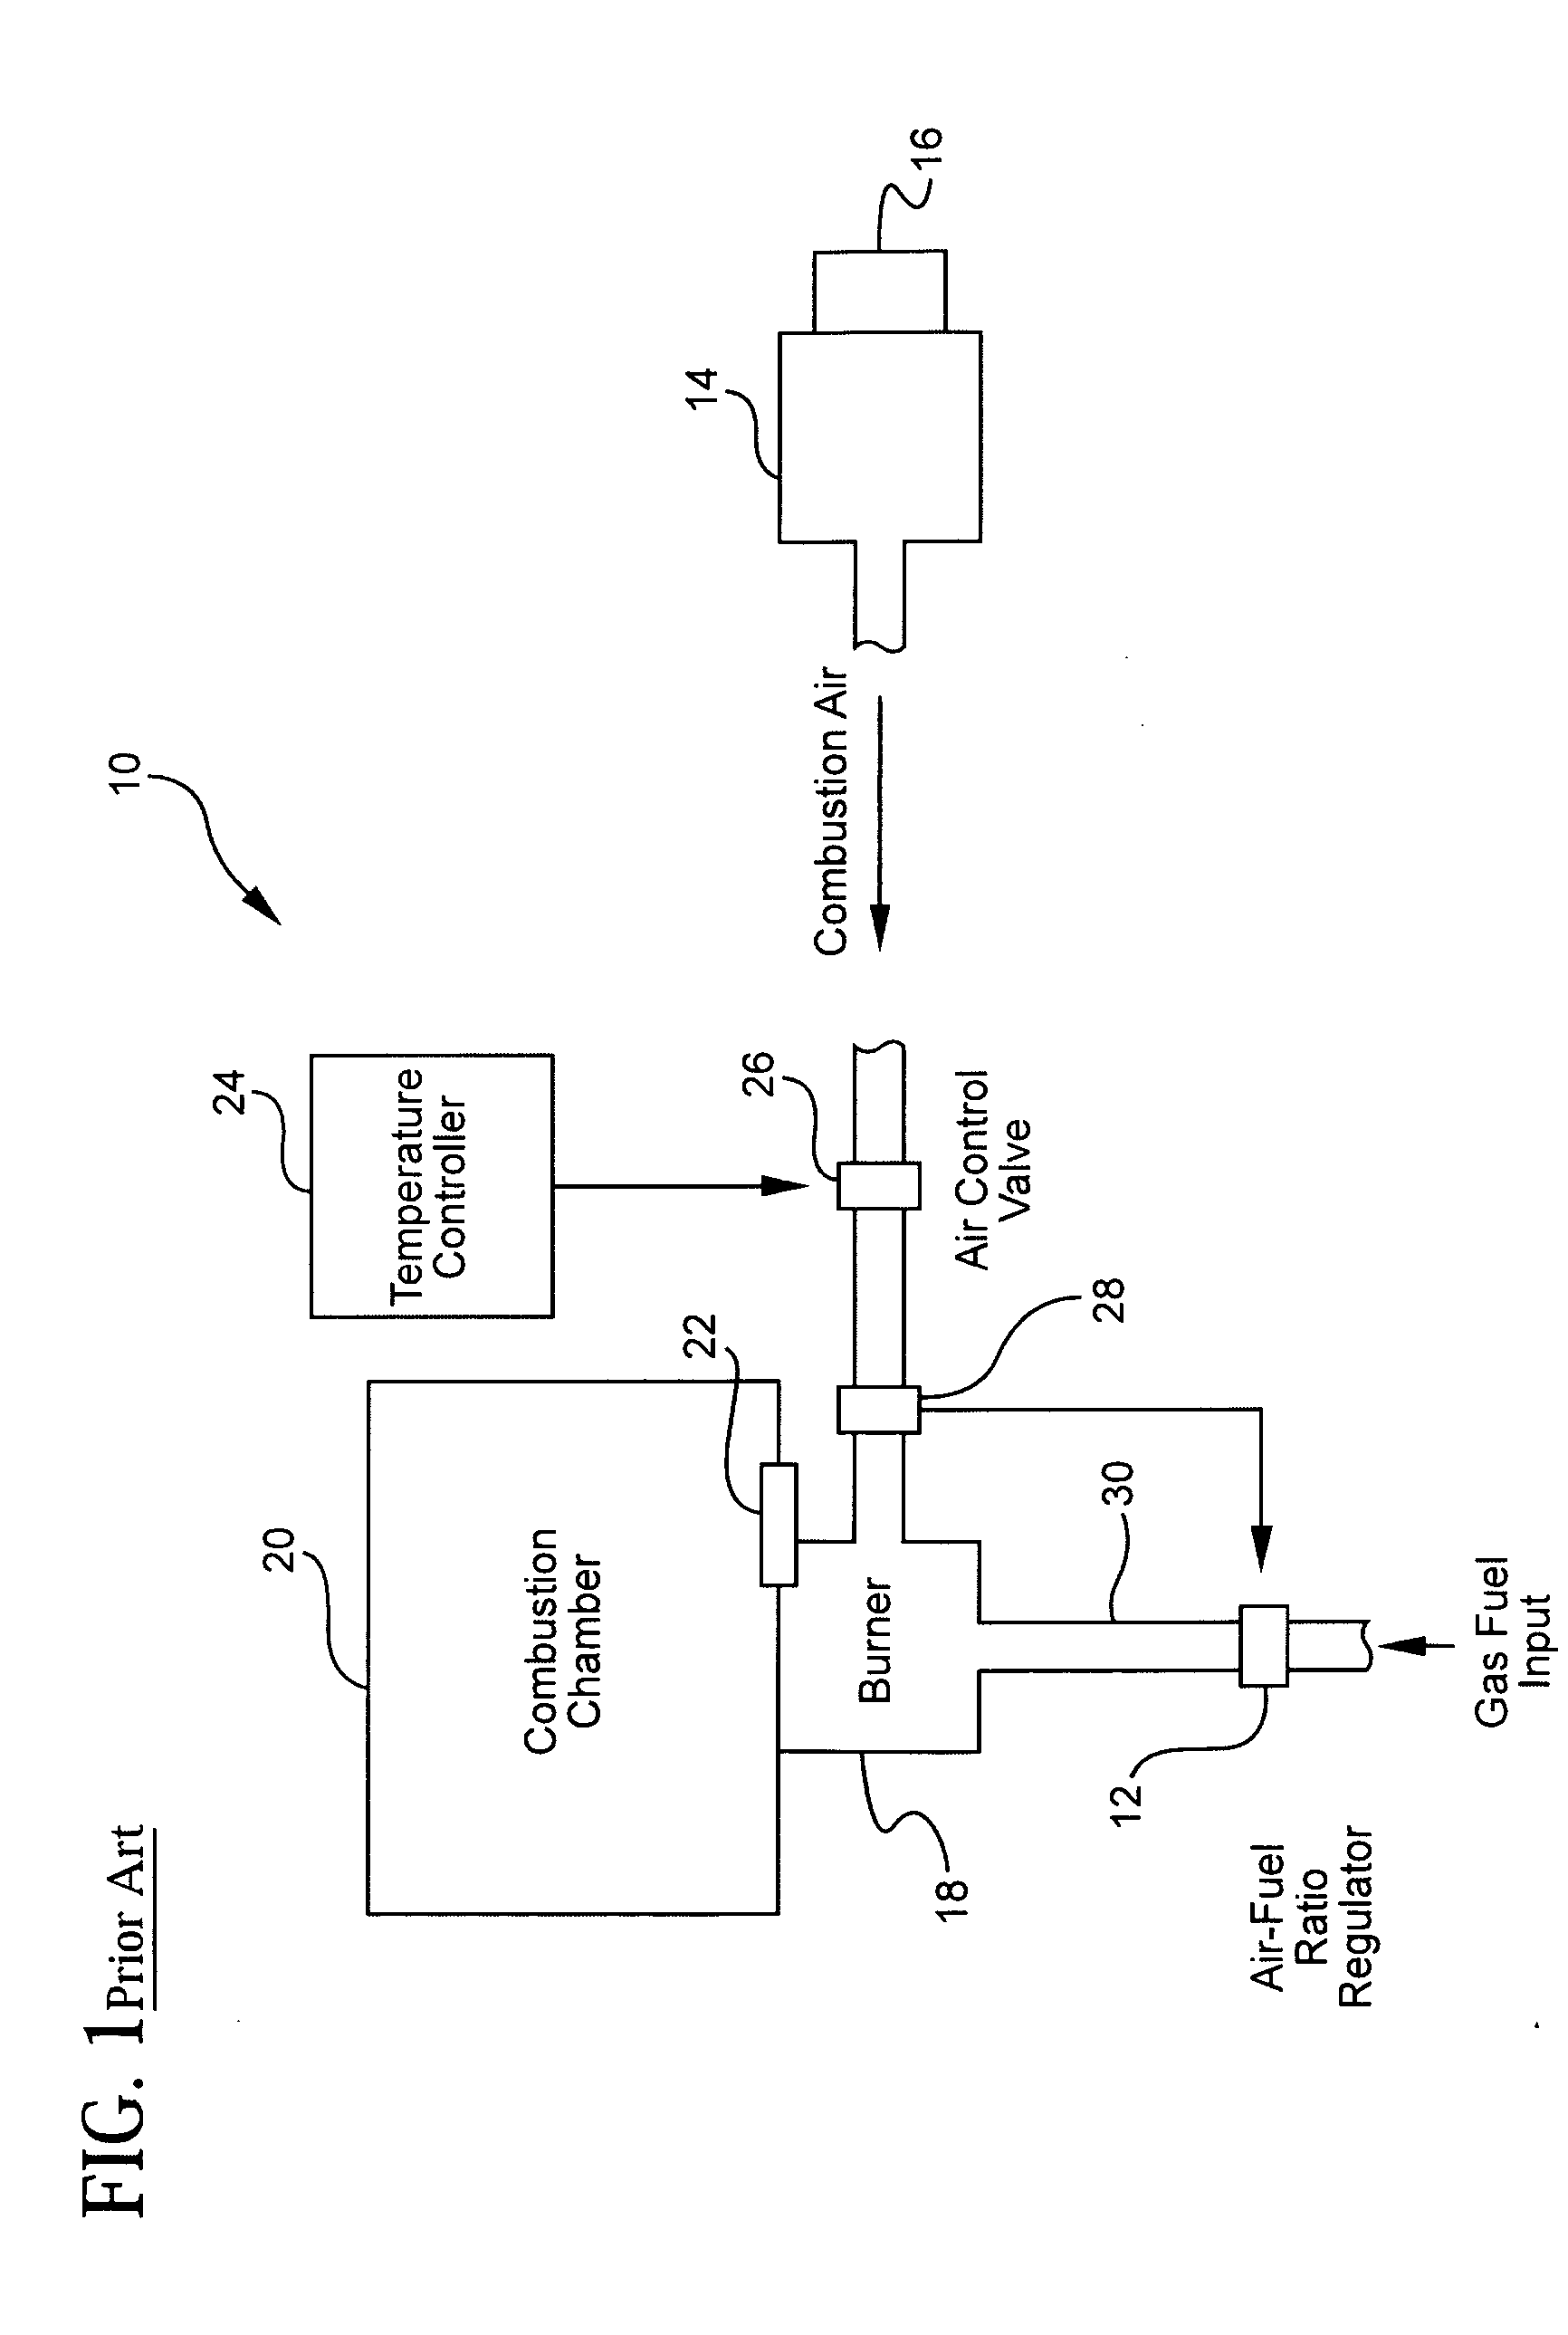 System and method for combustion-air modulation of a gas-fired heating system